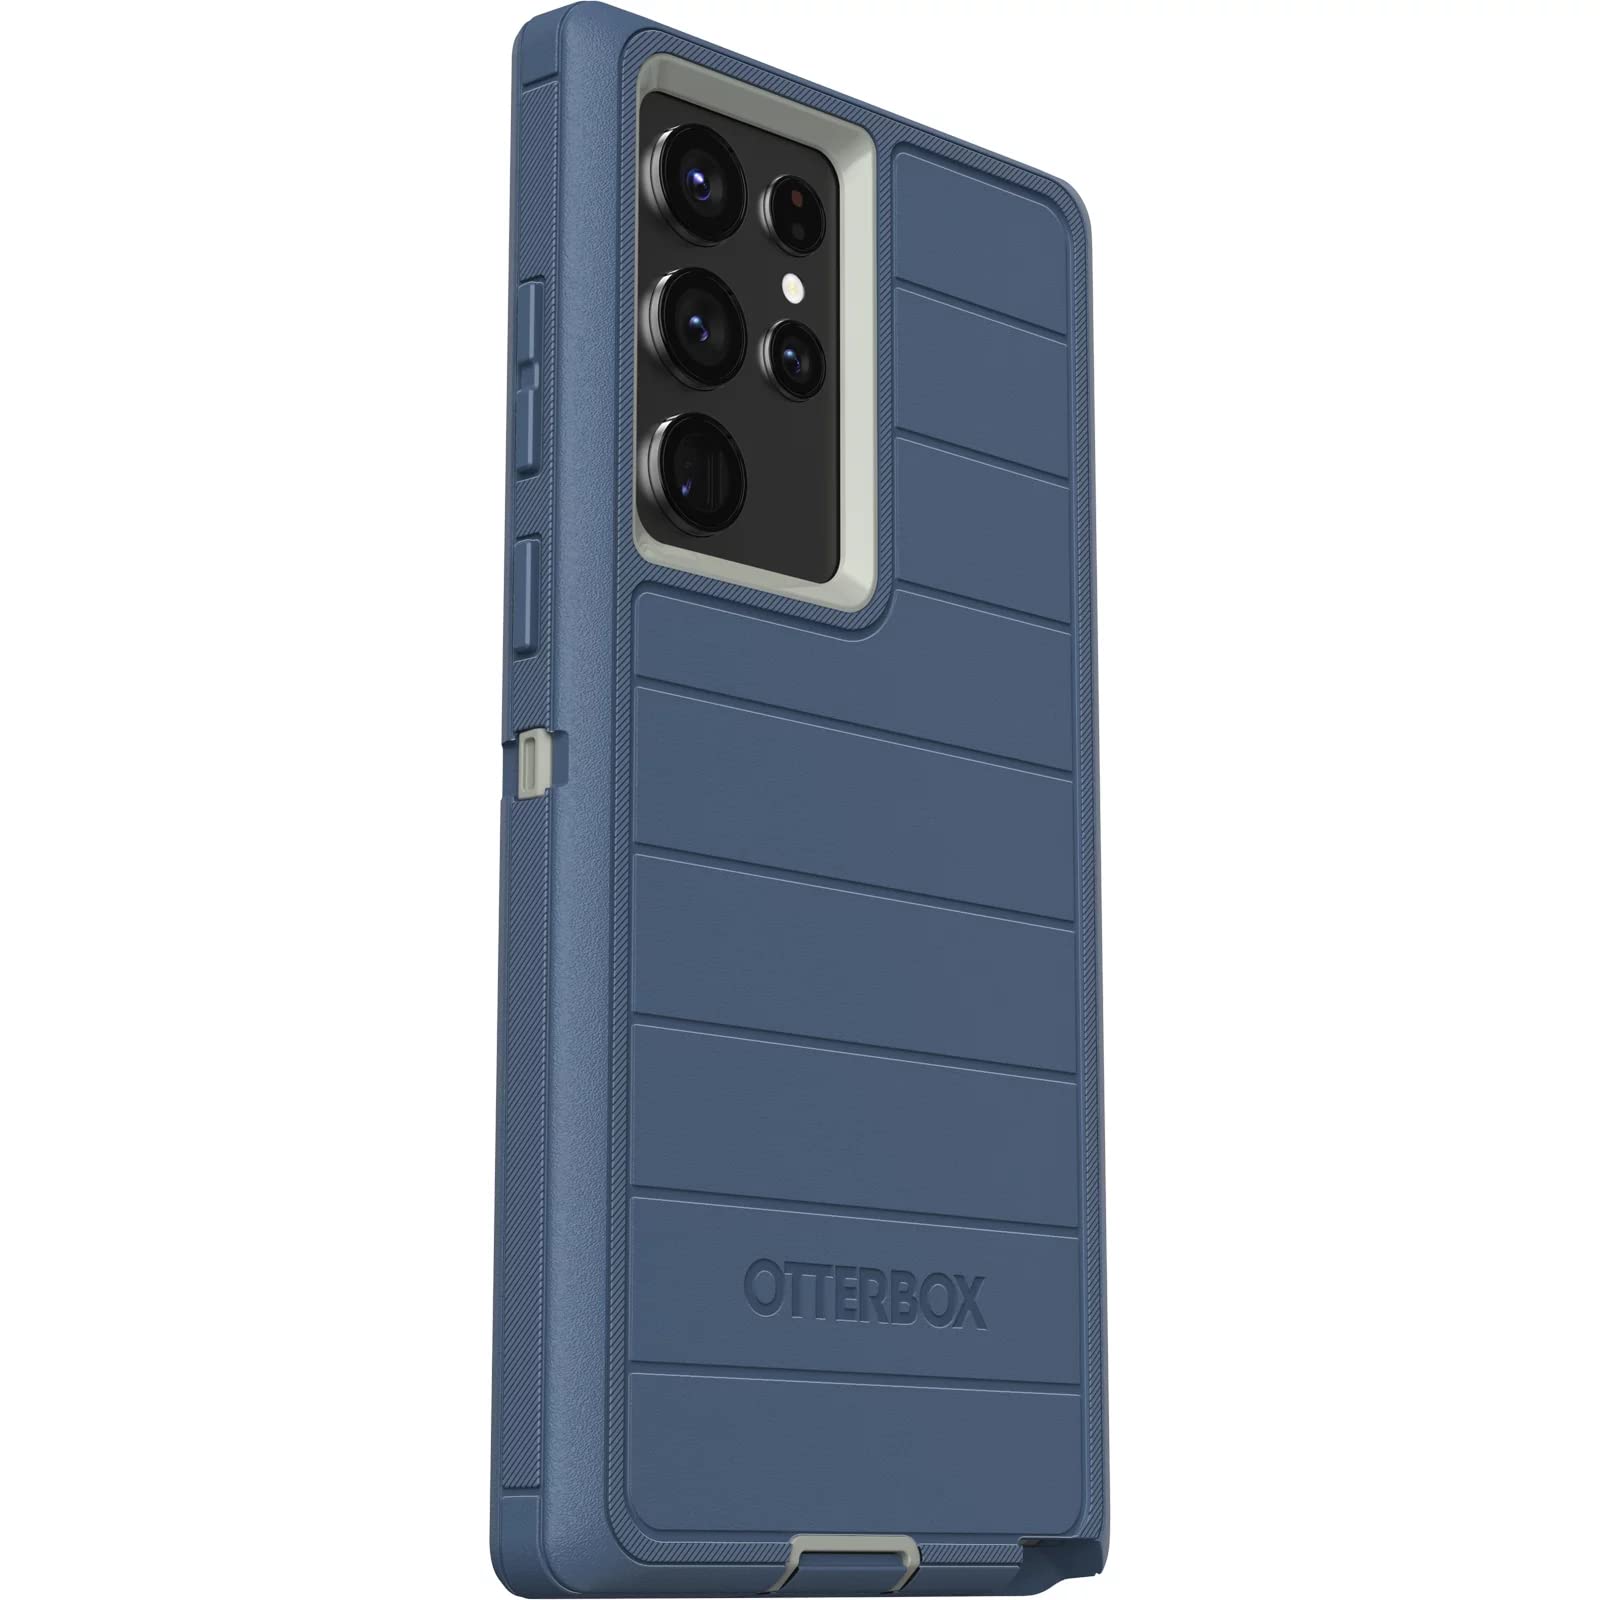 OtterBox Defender Series Case for Samsung Galaxy S22 Ultra (Only) - Case Only - Microbial Defense Protection - Non-Retail Packaging - Fort Blue